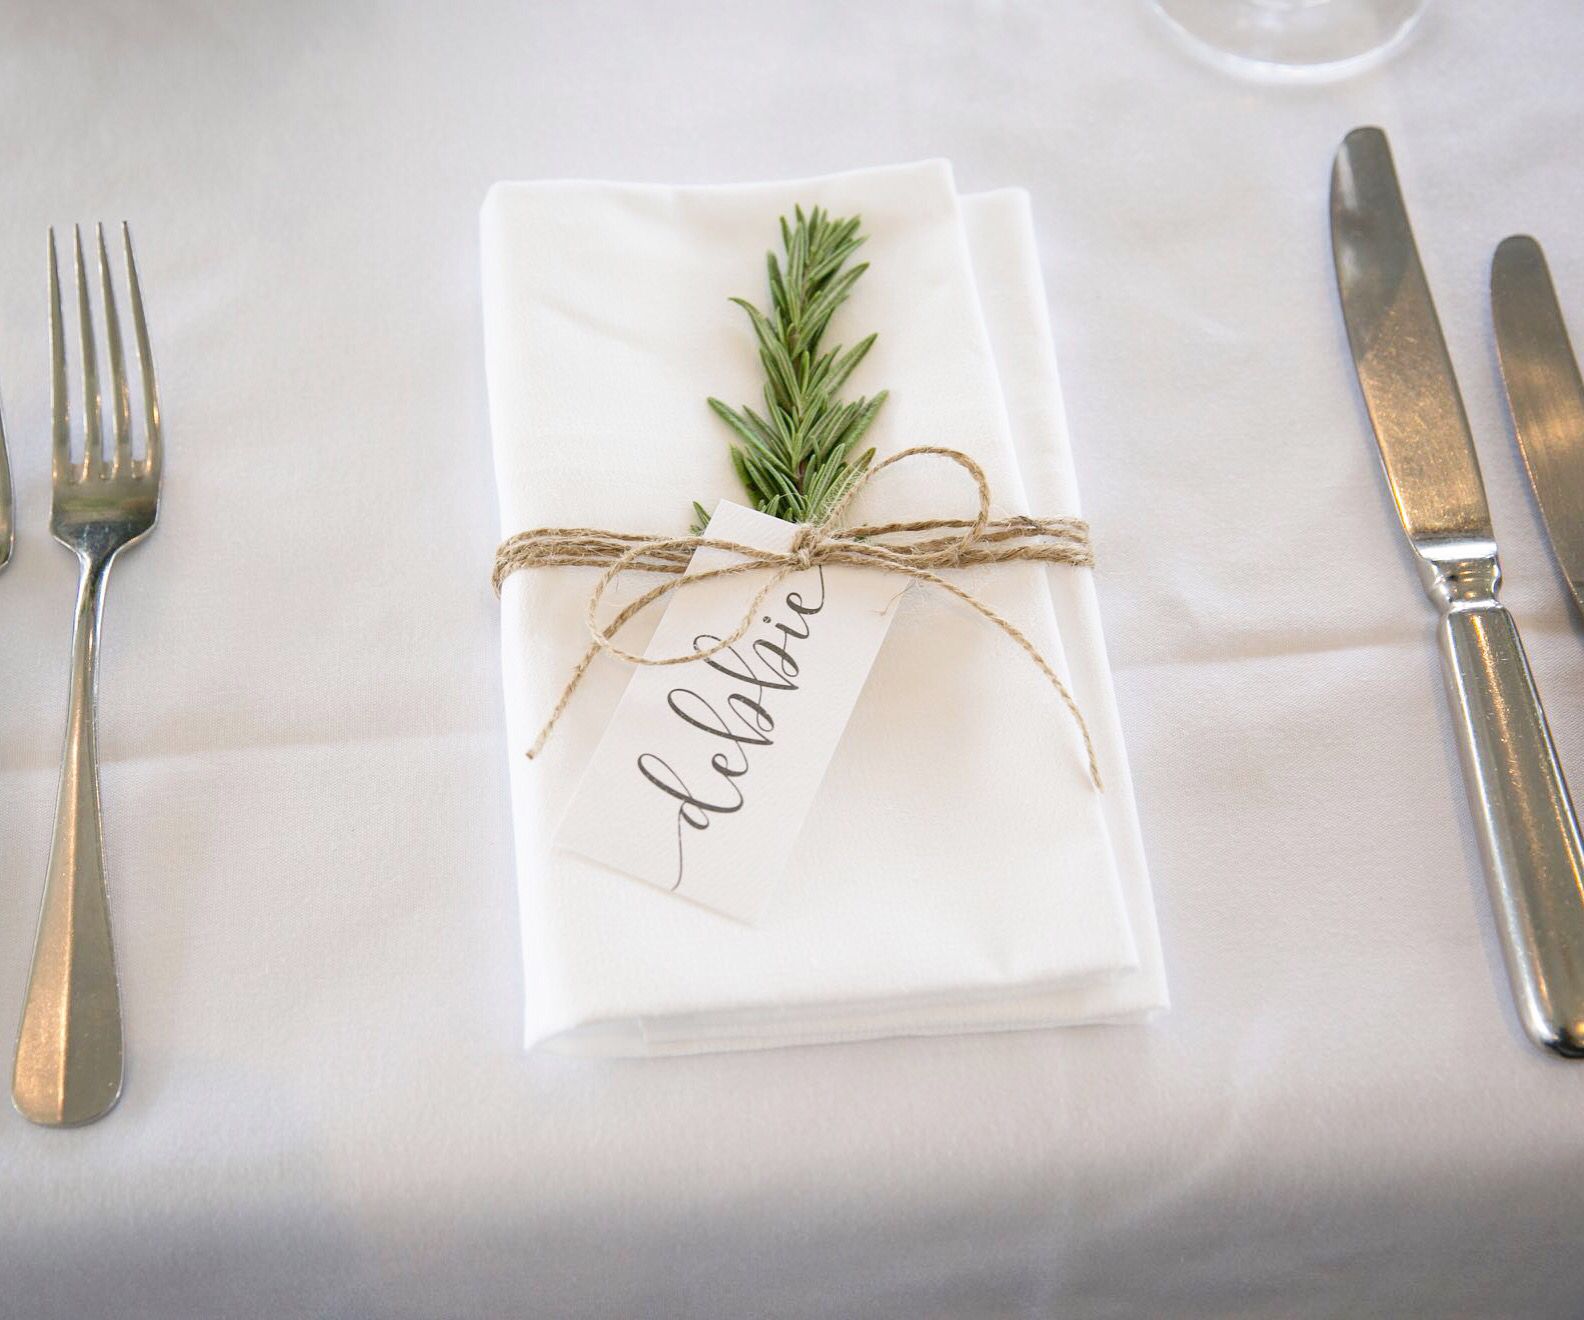 What Are The Name Tags Used On Place Settings Called